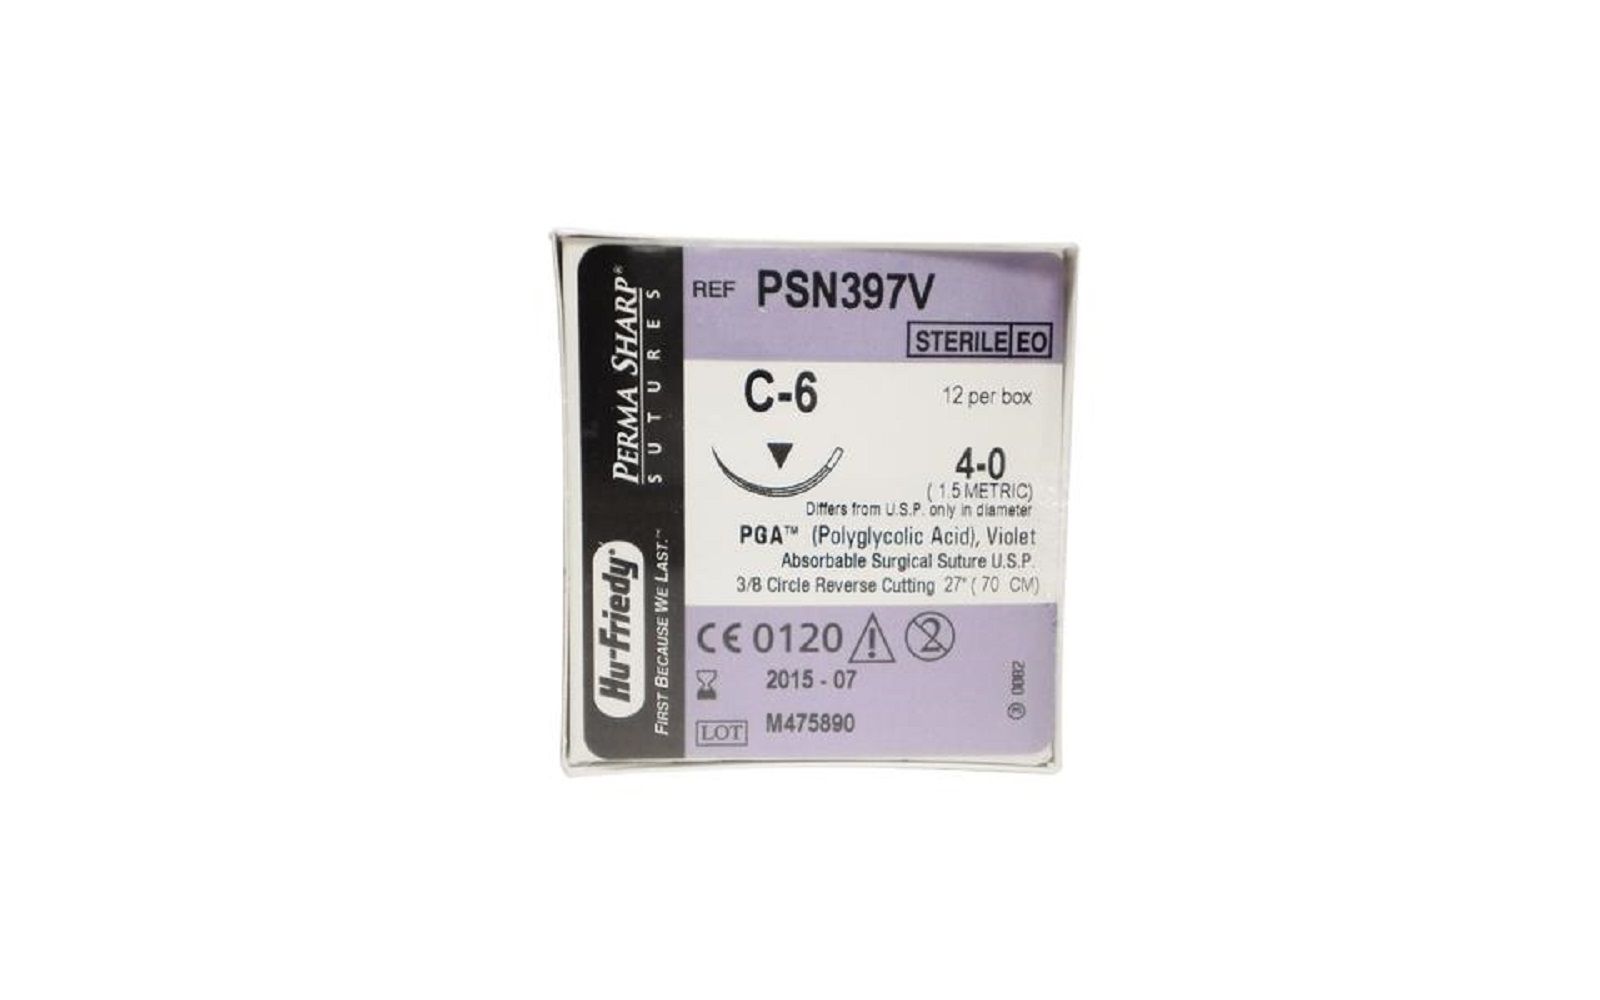 Perma sharp® polyglycolic acid (pga) violet braided absorbable sutures, 12/pkg - hu-friedy manufacturing co inc